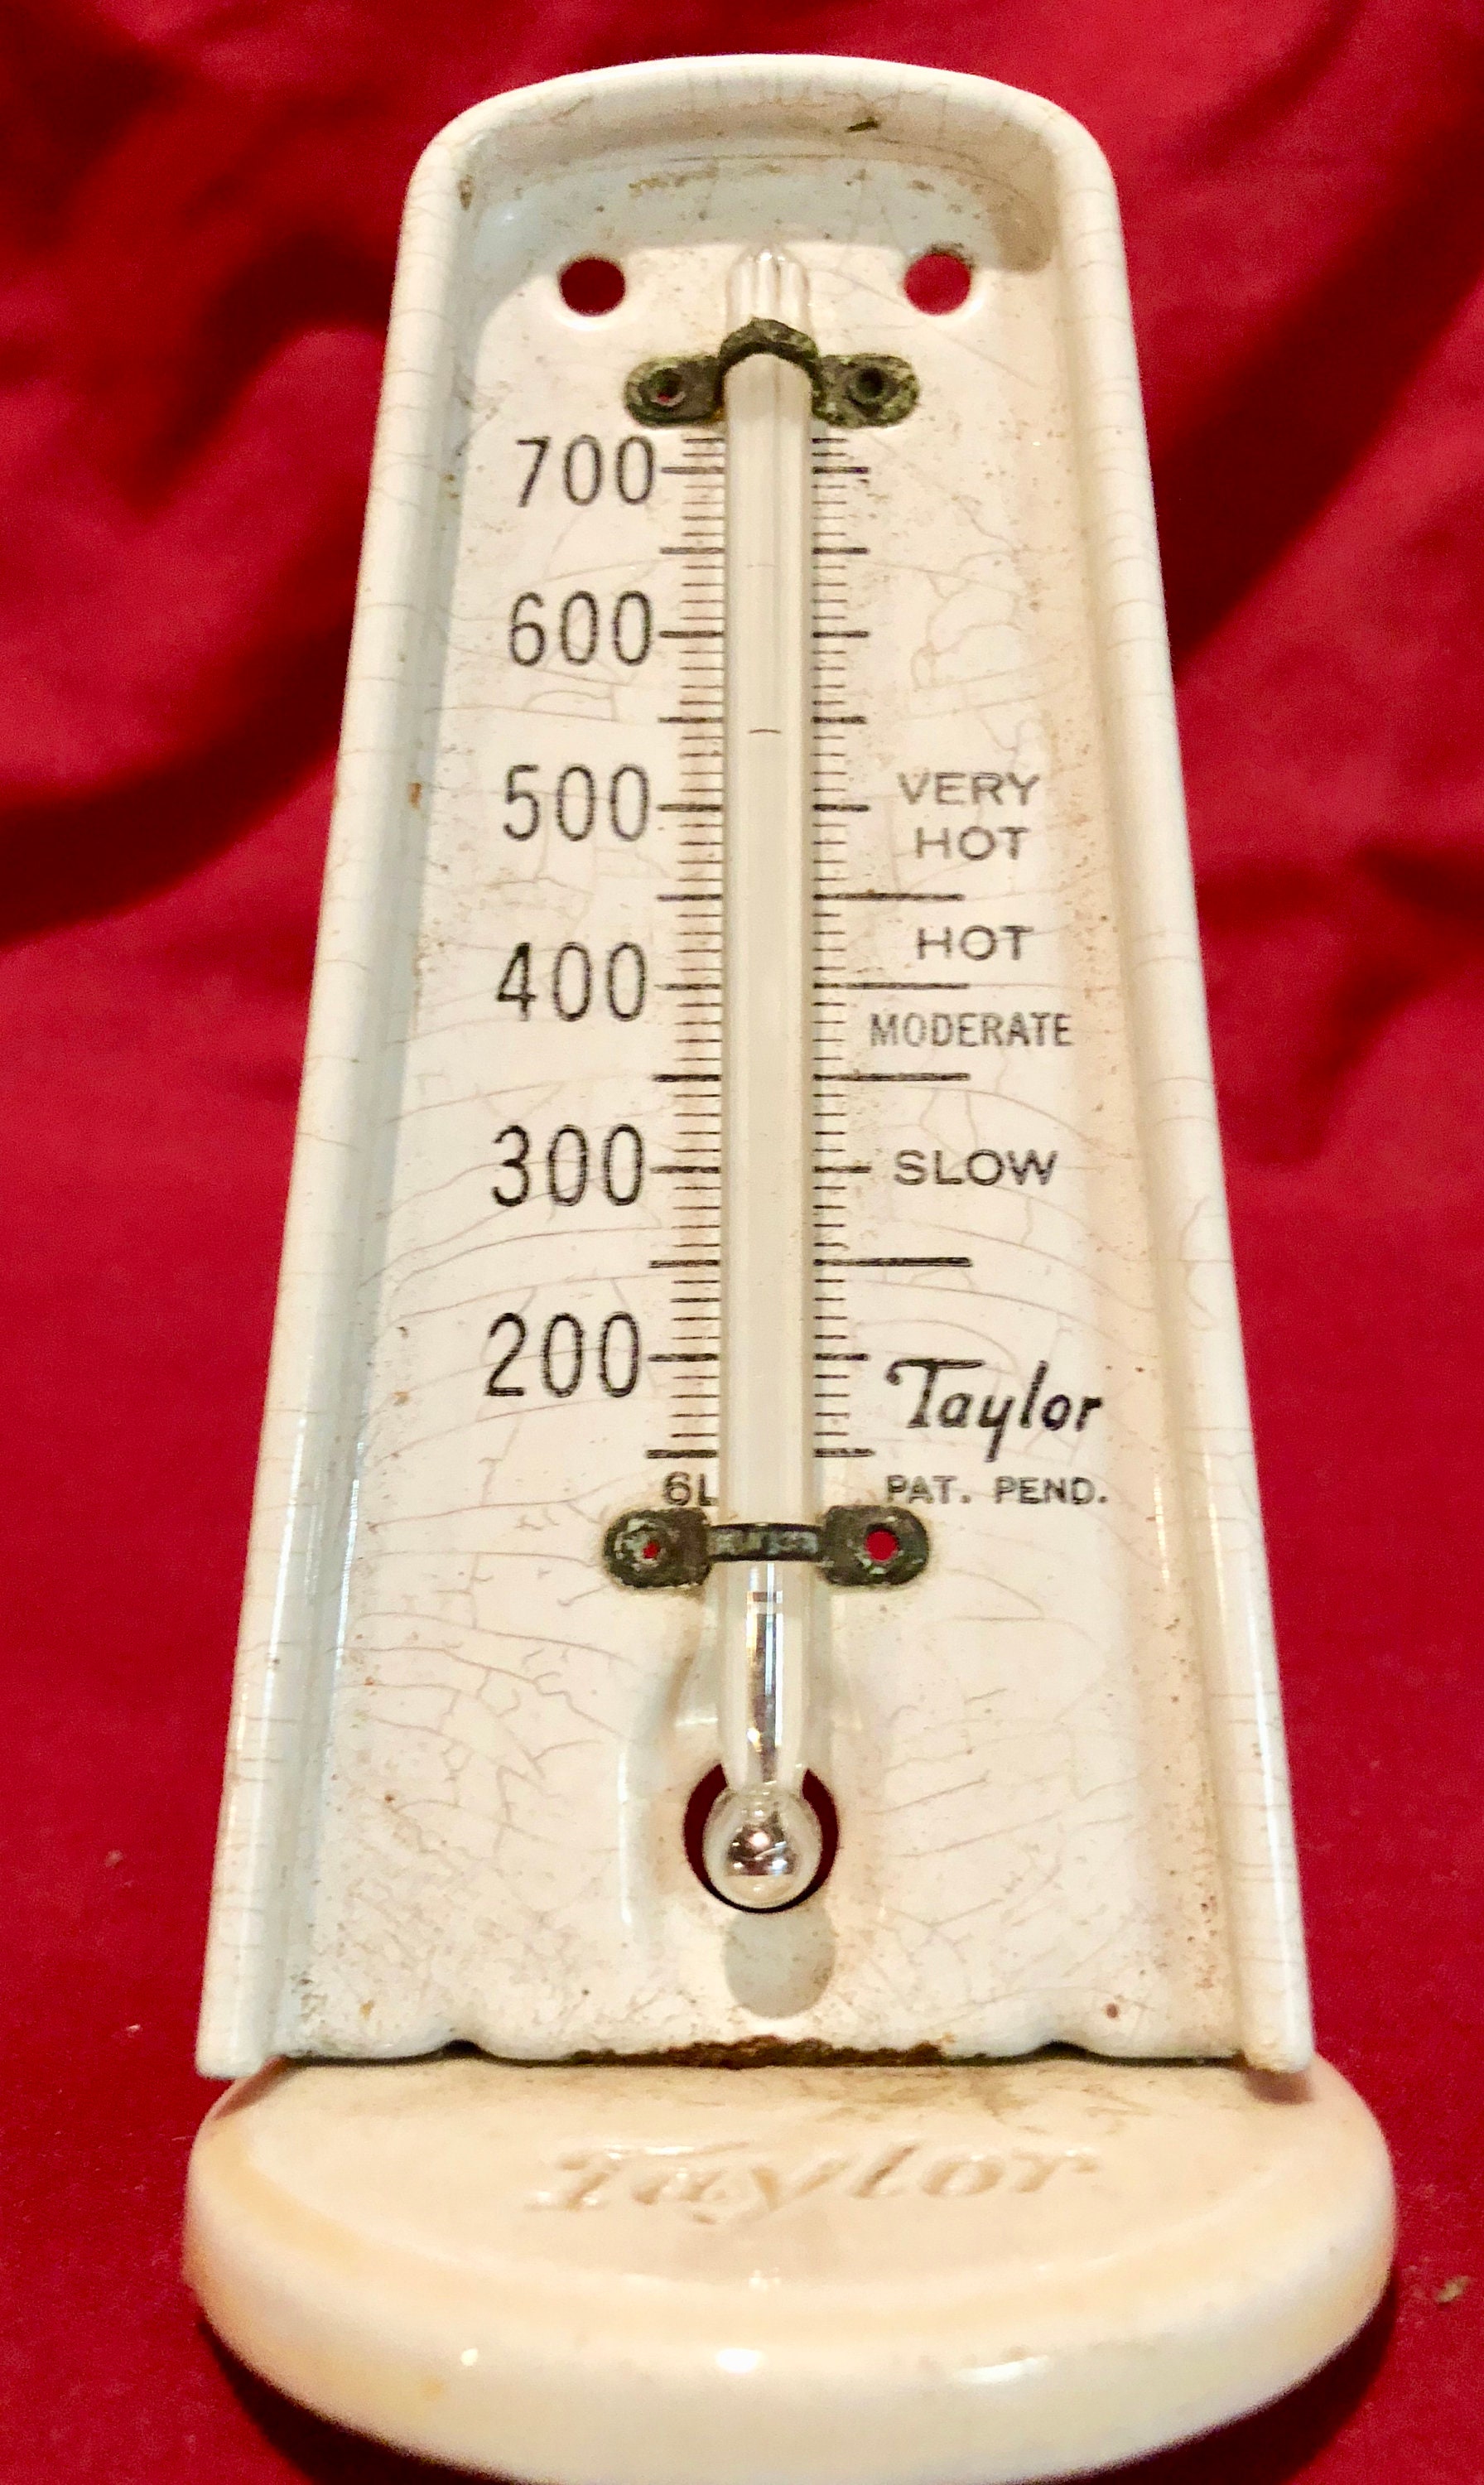 Taylor Classic Oven Thermometer 3D model